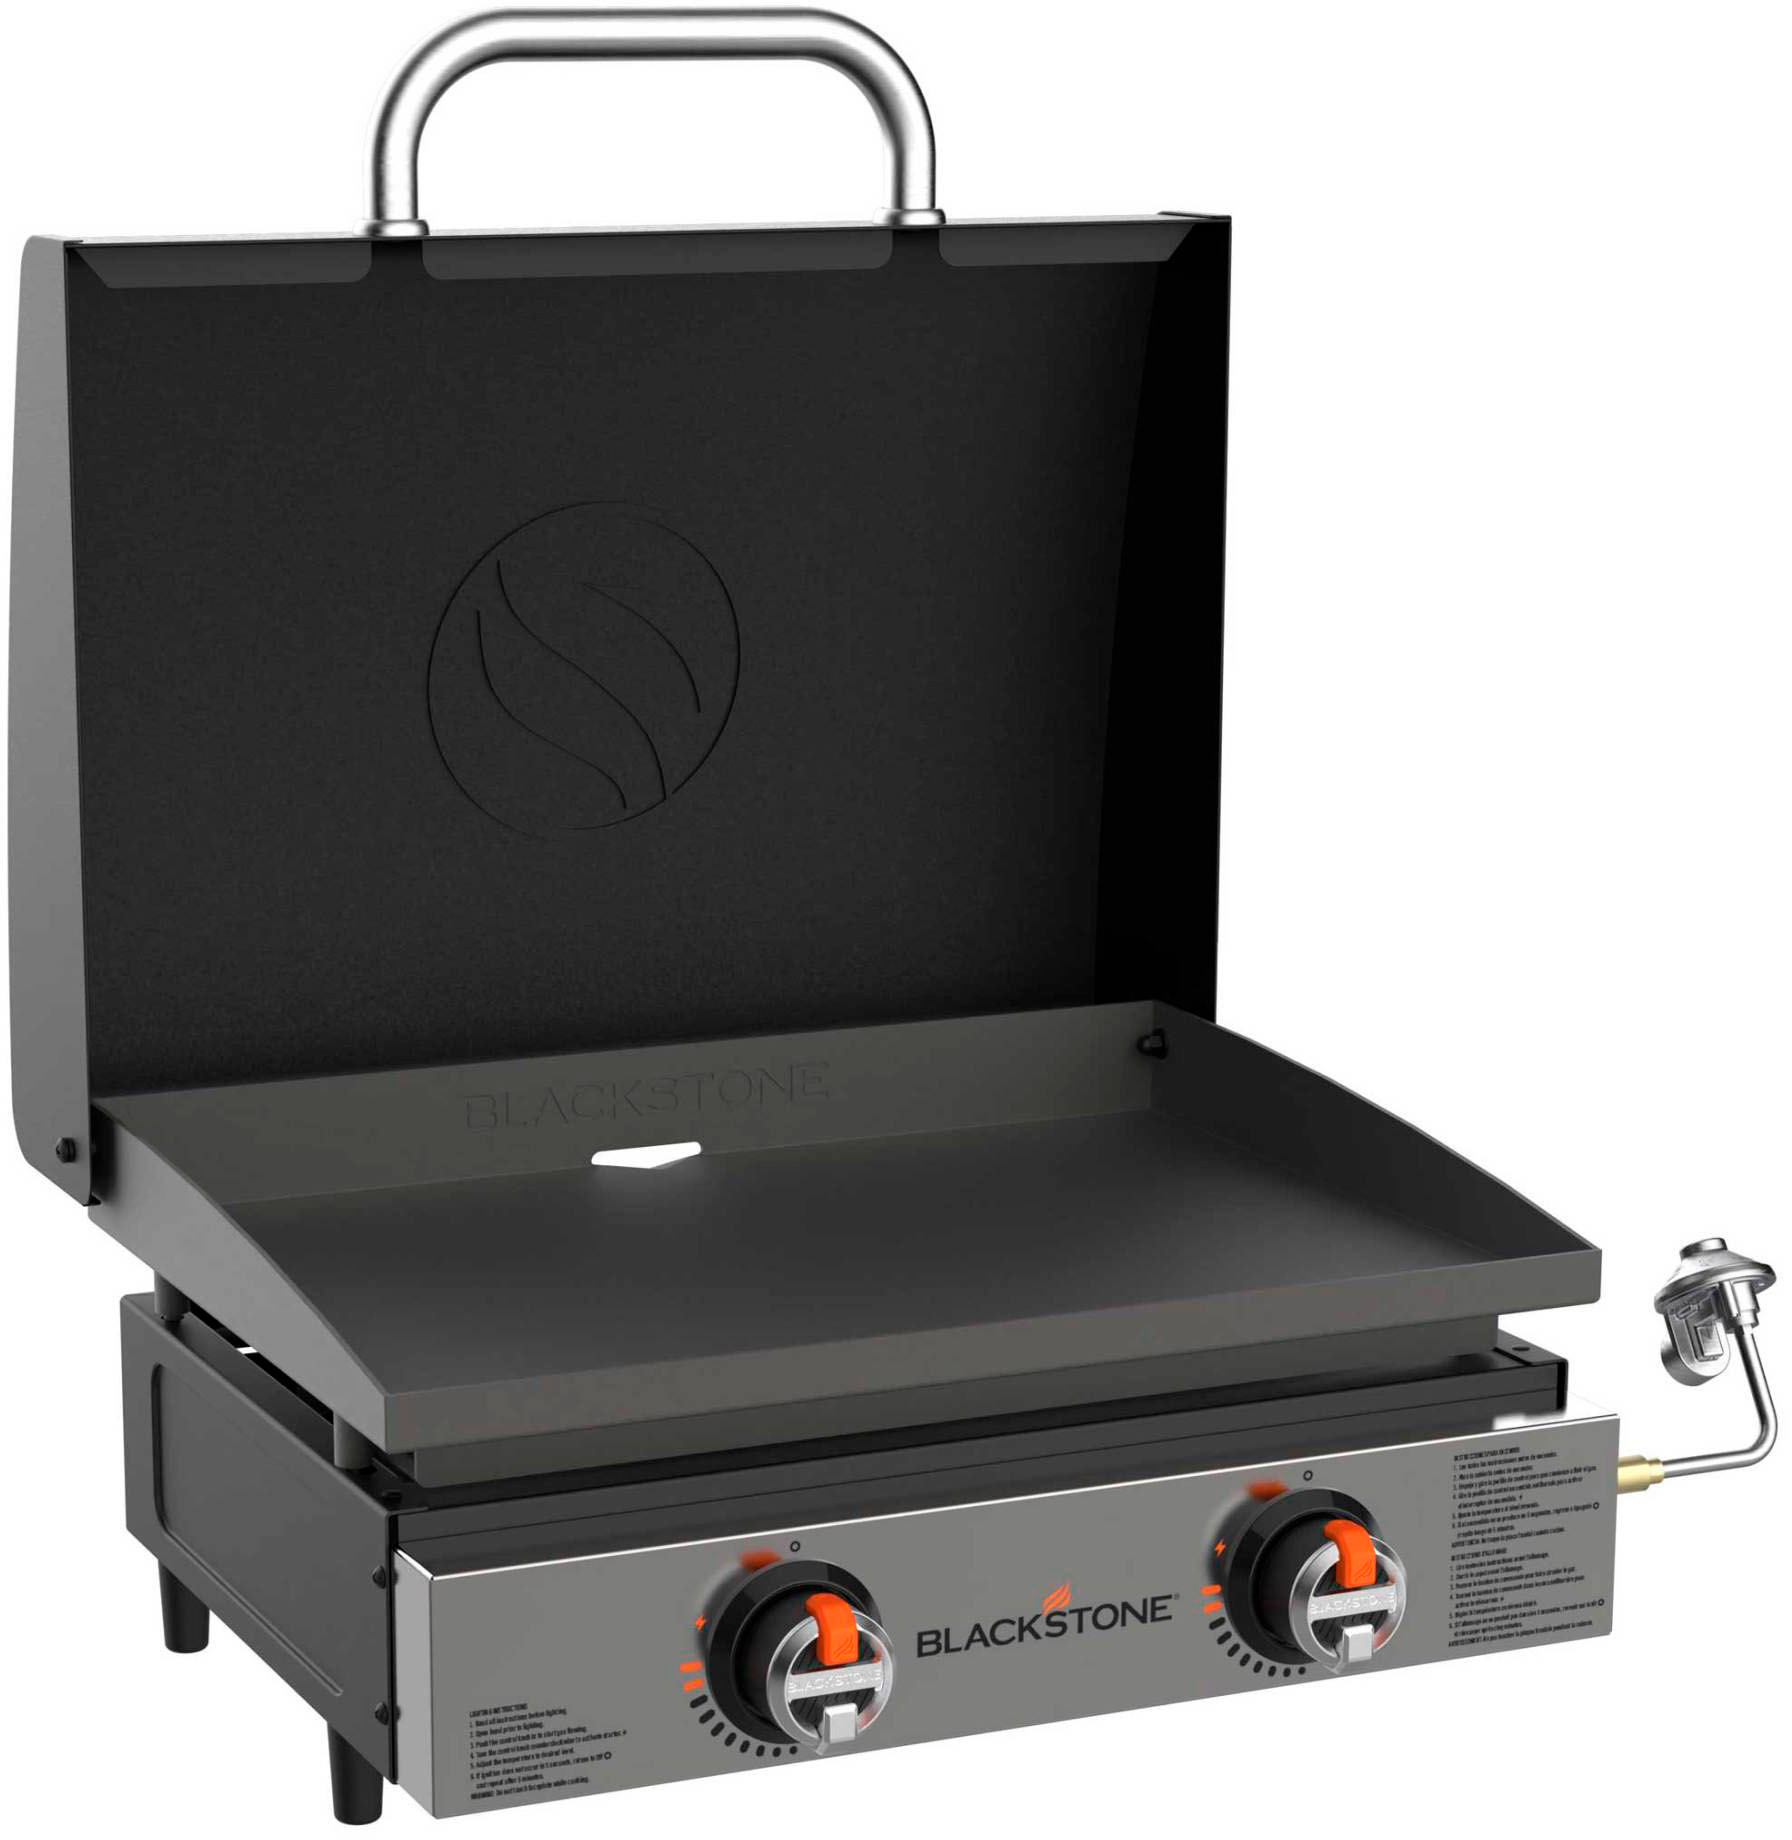 Angle View: Blackstone - 22-in. Countertop Outdoor Griddle - Black